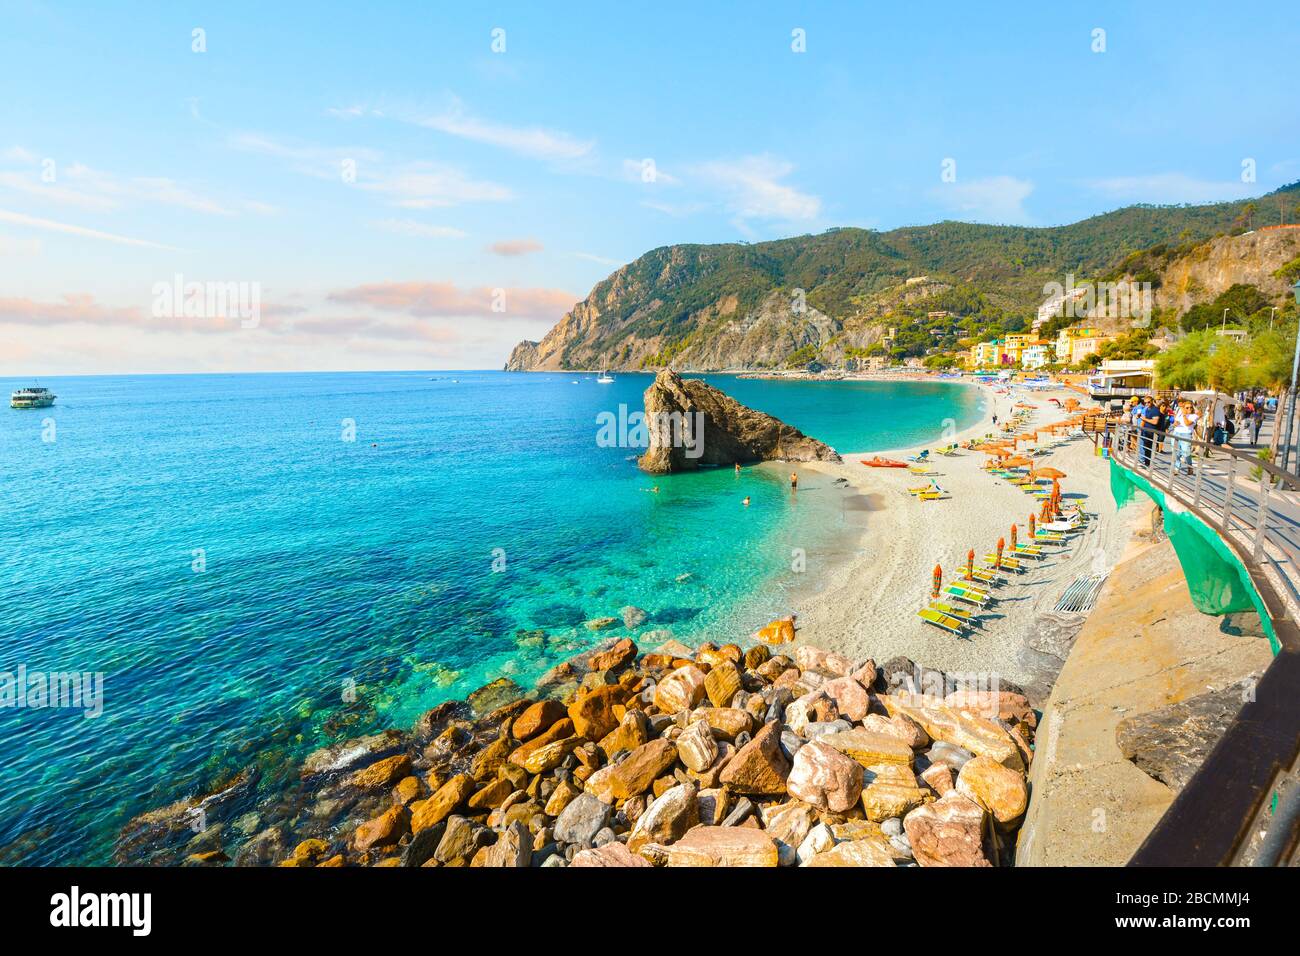 The sandy beach at the Italian village of Monterosso al Mare on the Ligurian coast, part of the Cinque Terre, an Unesco World Heritage Site. Stock Photo